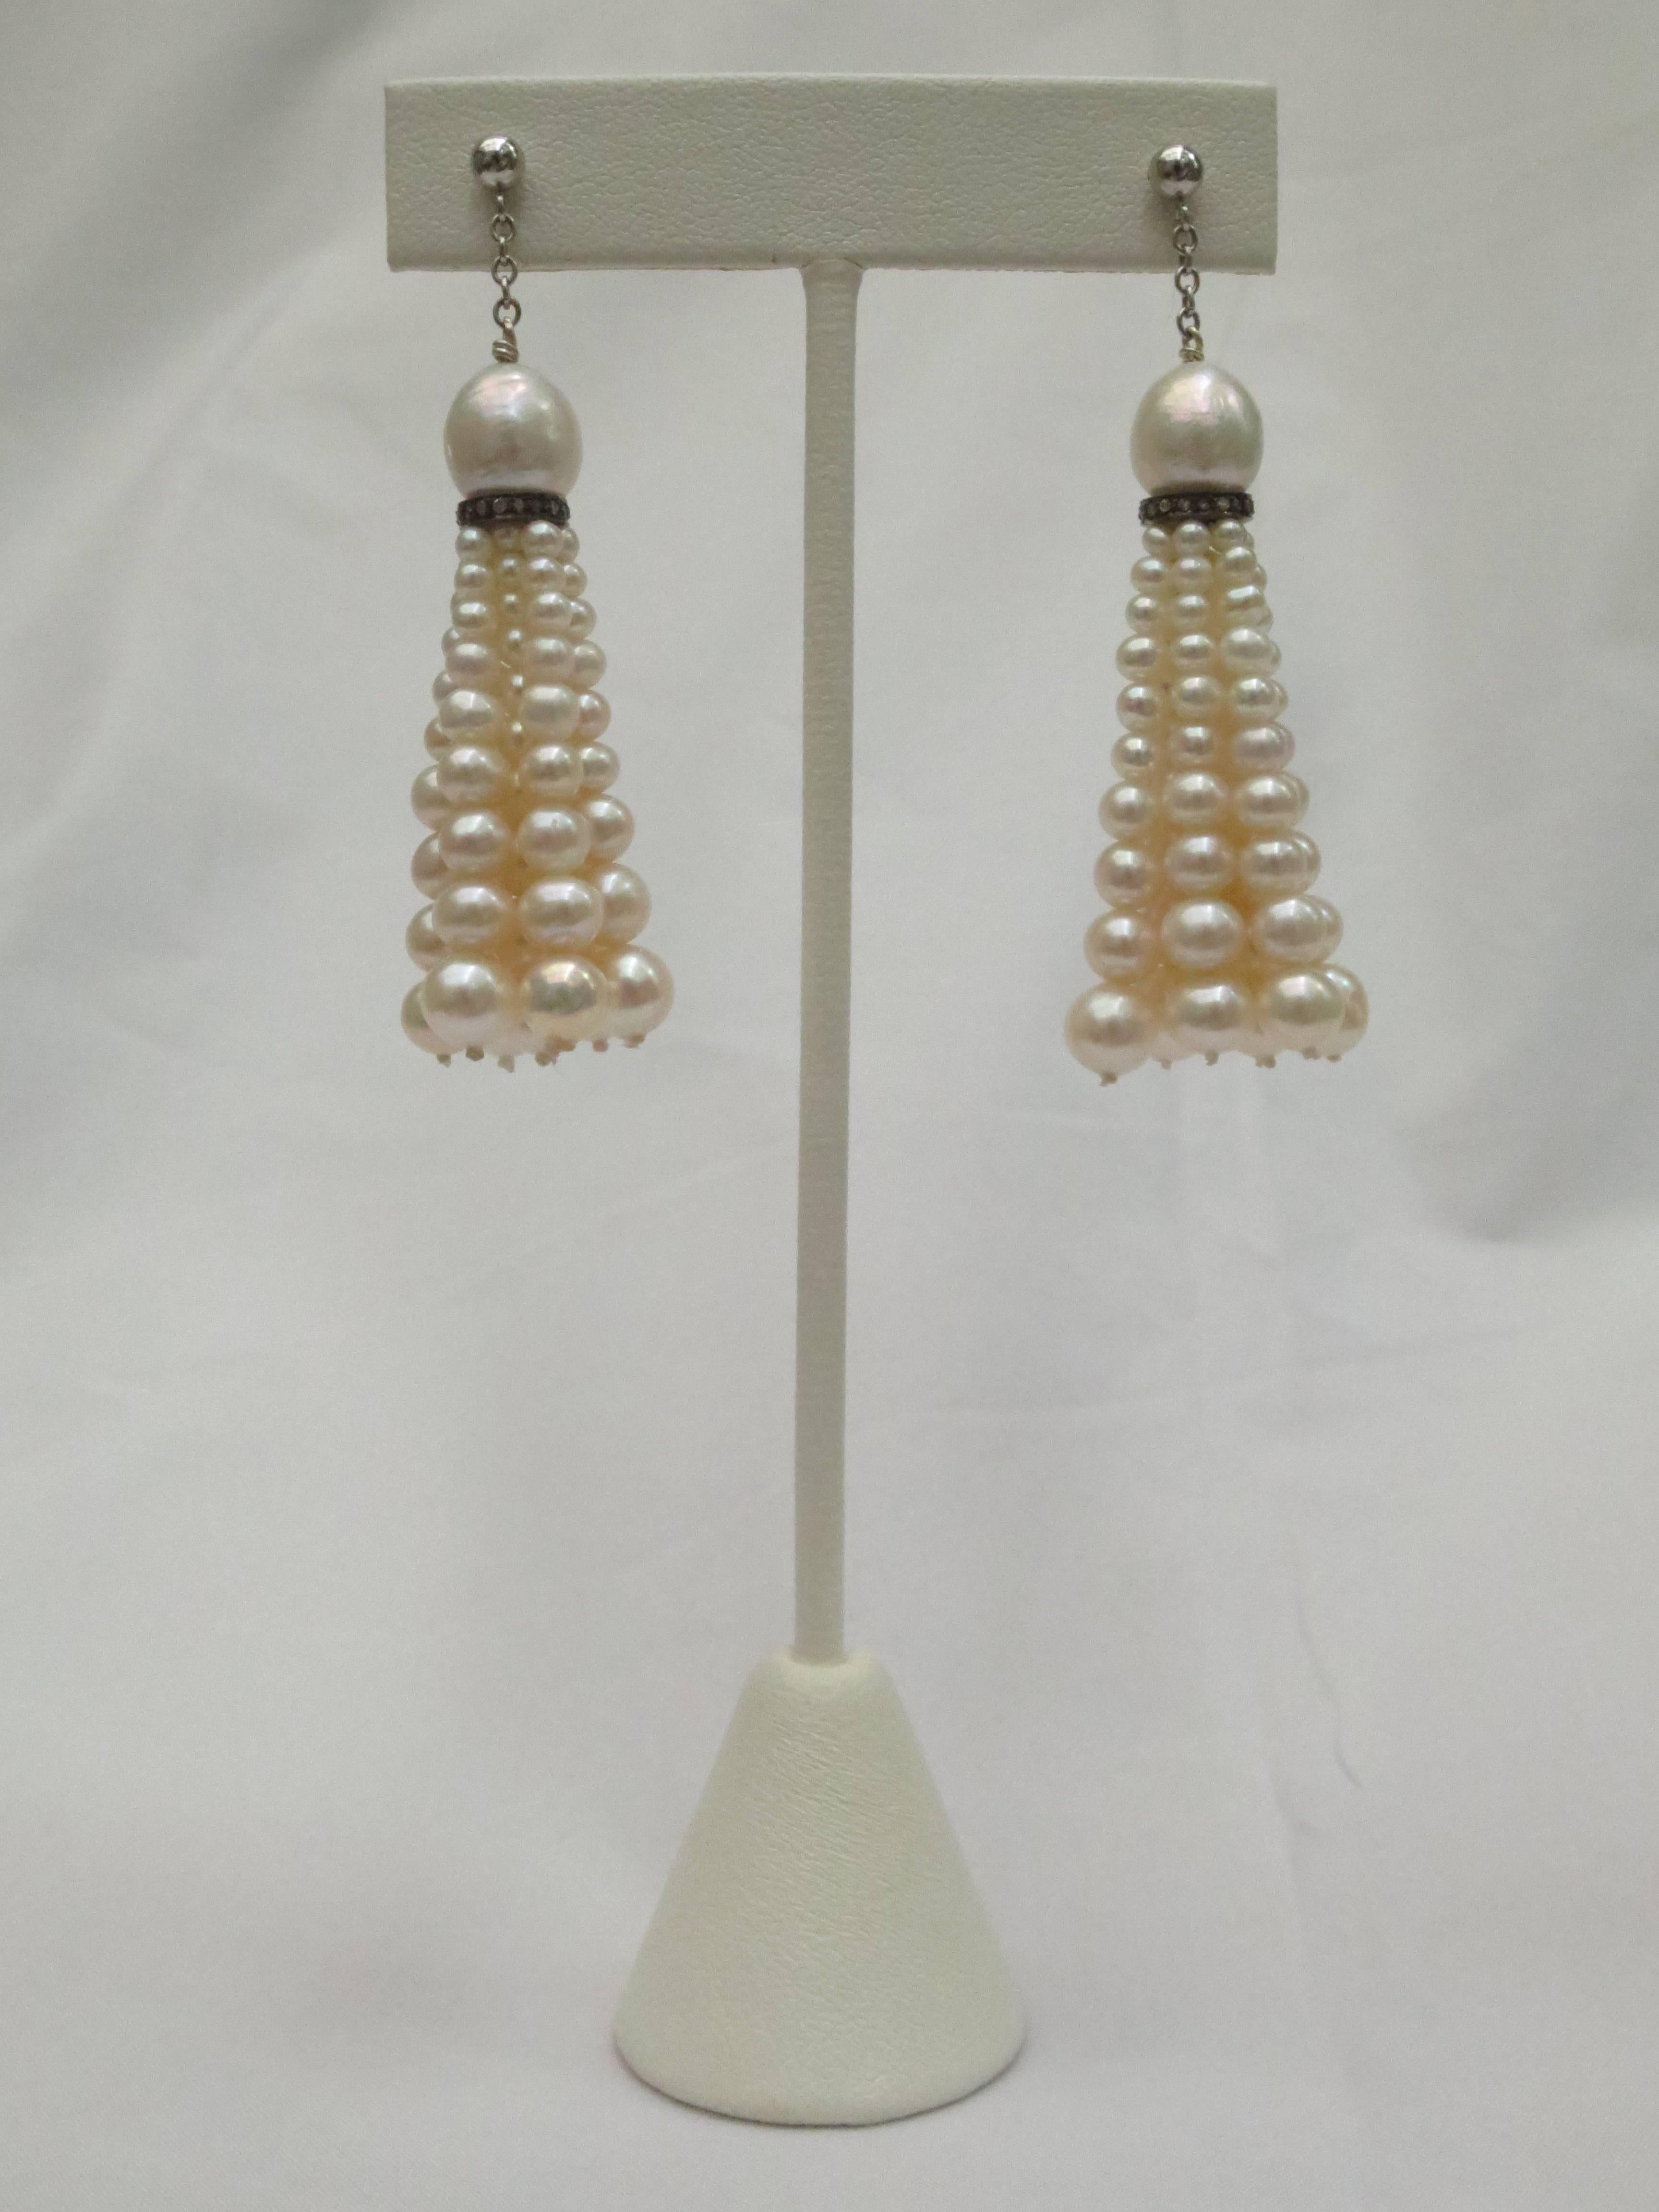 These timeless dangle earrings feature a large 9 mm cultured pearl cup set on a sterling silver and diamond rondelle. The tassels are made of fine graduated cultured pearls. Ear-stud is 14k white gold followed by a white gold chain for free